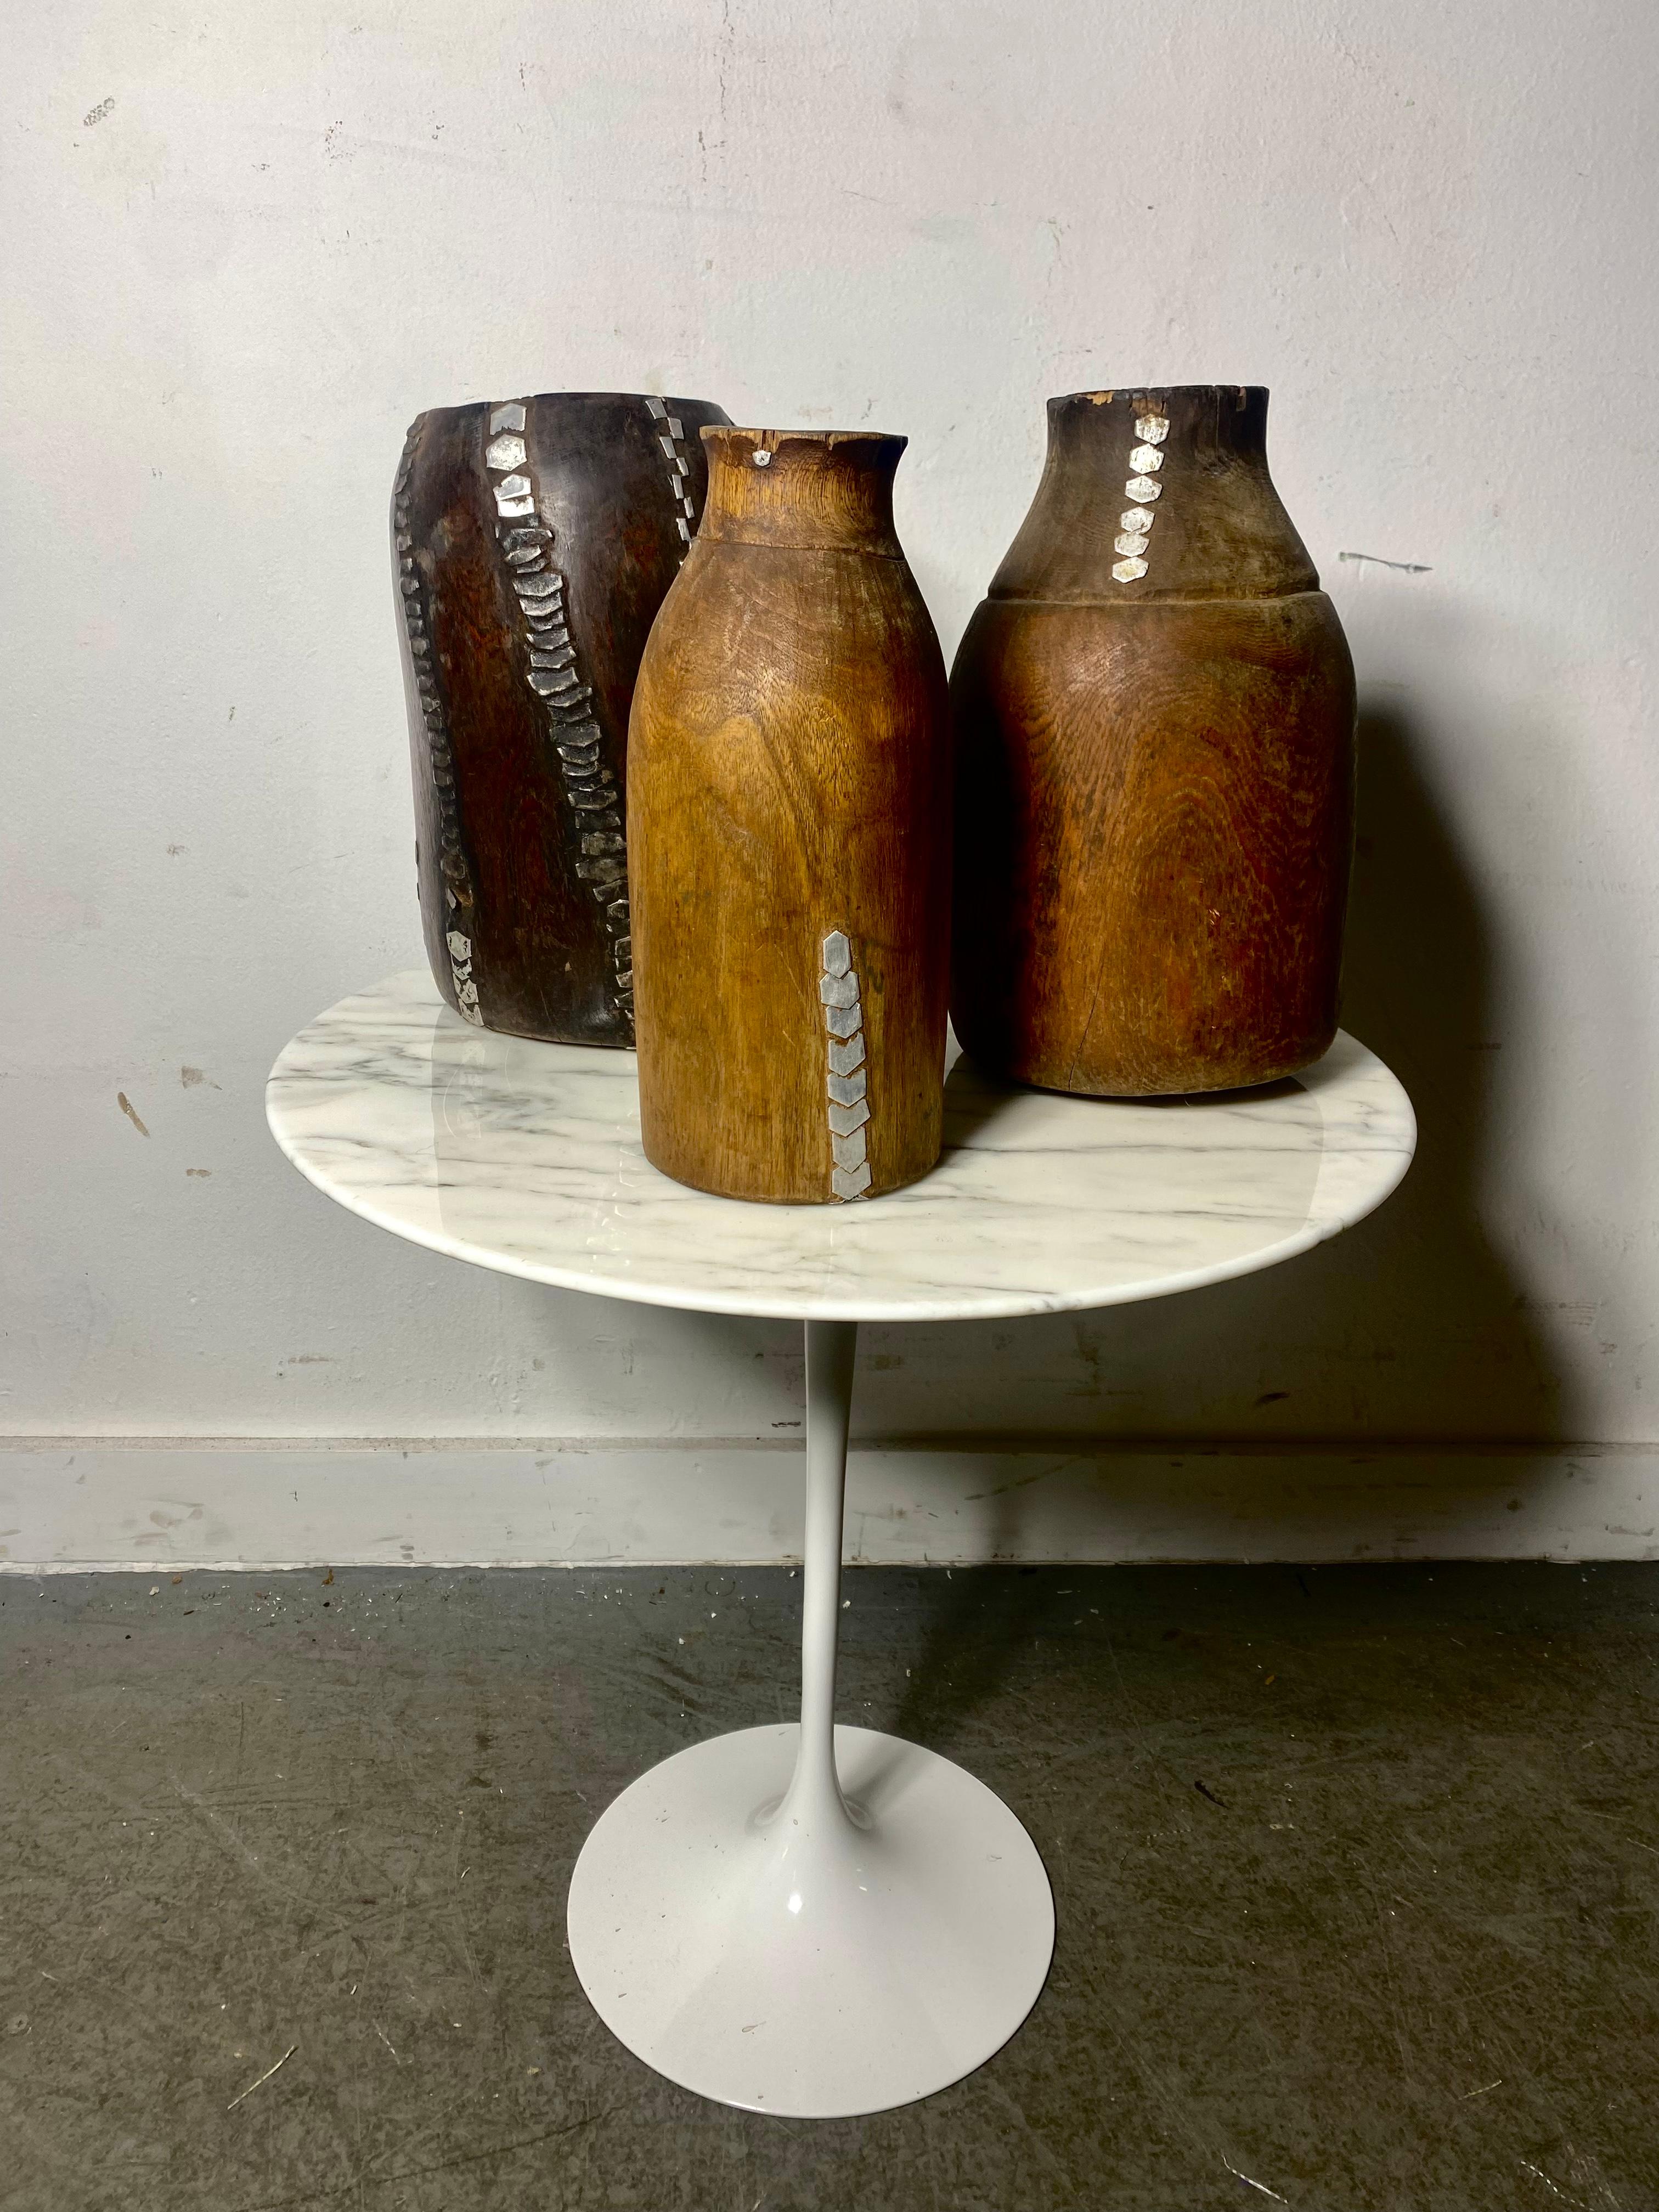 These authentic wood milk containers from Rwanda can be traced to the Tutsi people, an ethnic group of the African Great Lakes region. From the 15th century, cattle and the arts - among many other things - had an important role in Tutsi culture,